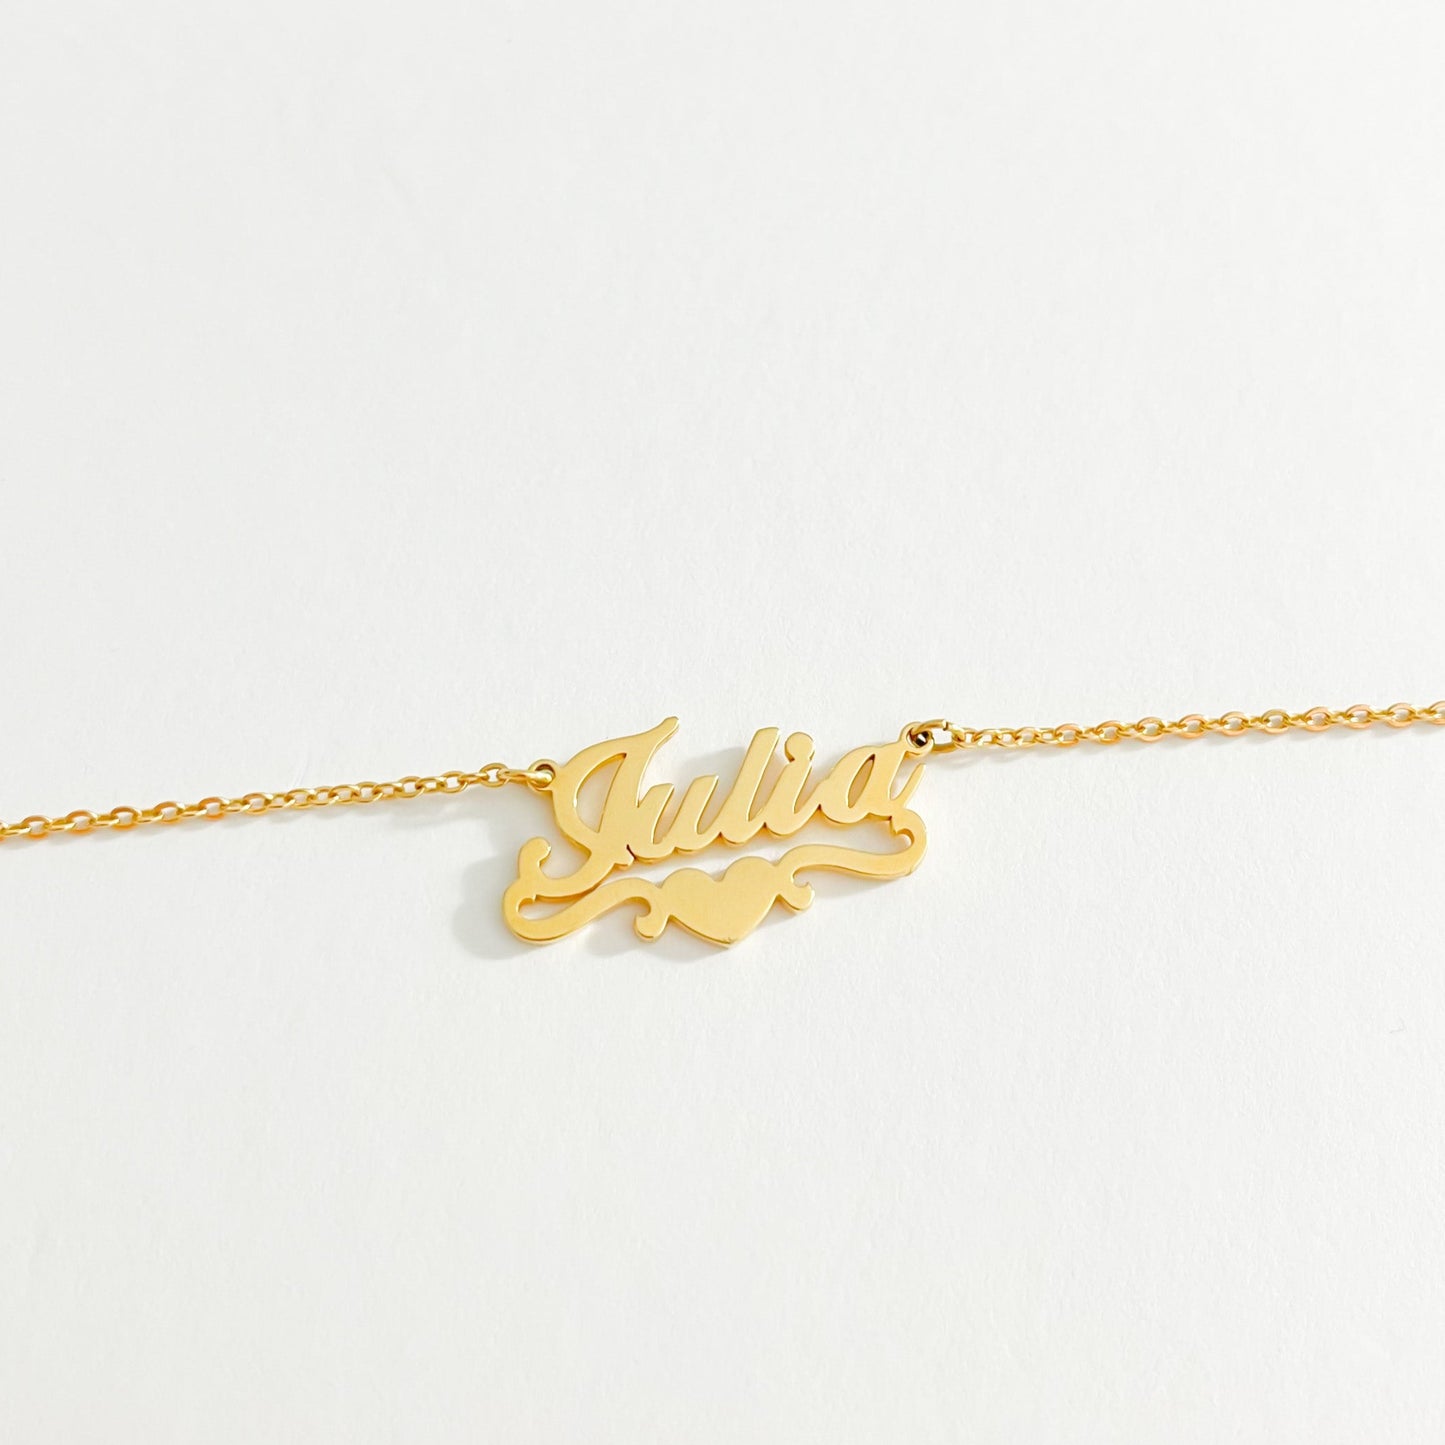 THE PERSONALISED HEART NAME NECKLACE